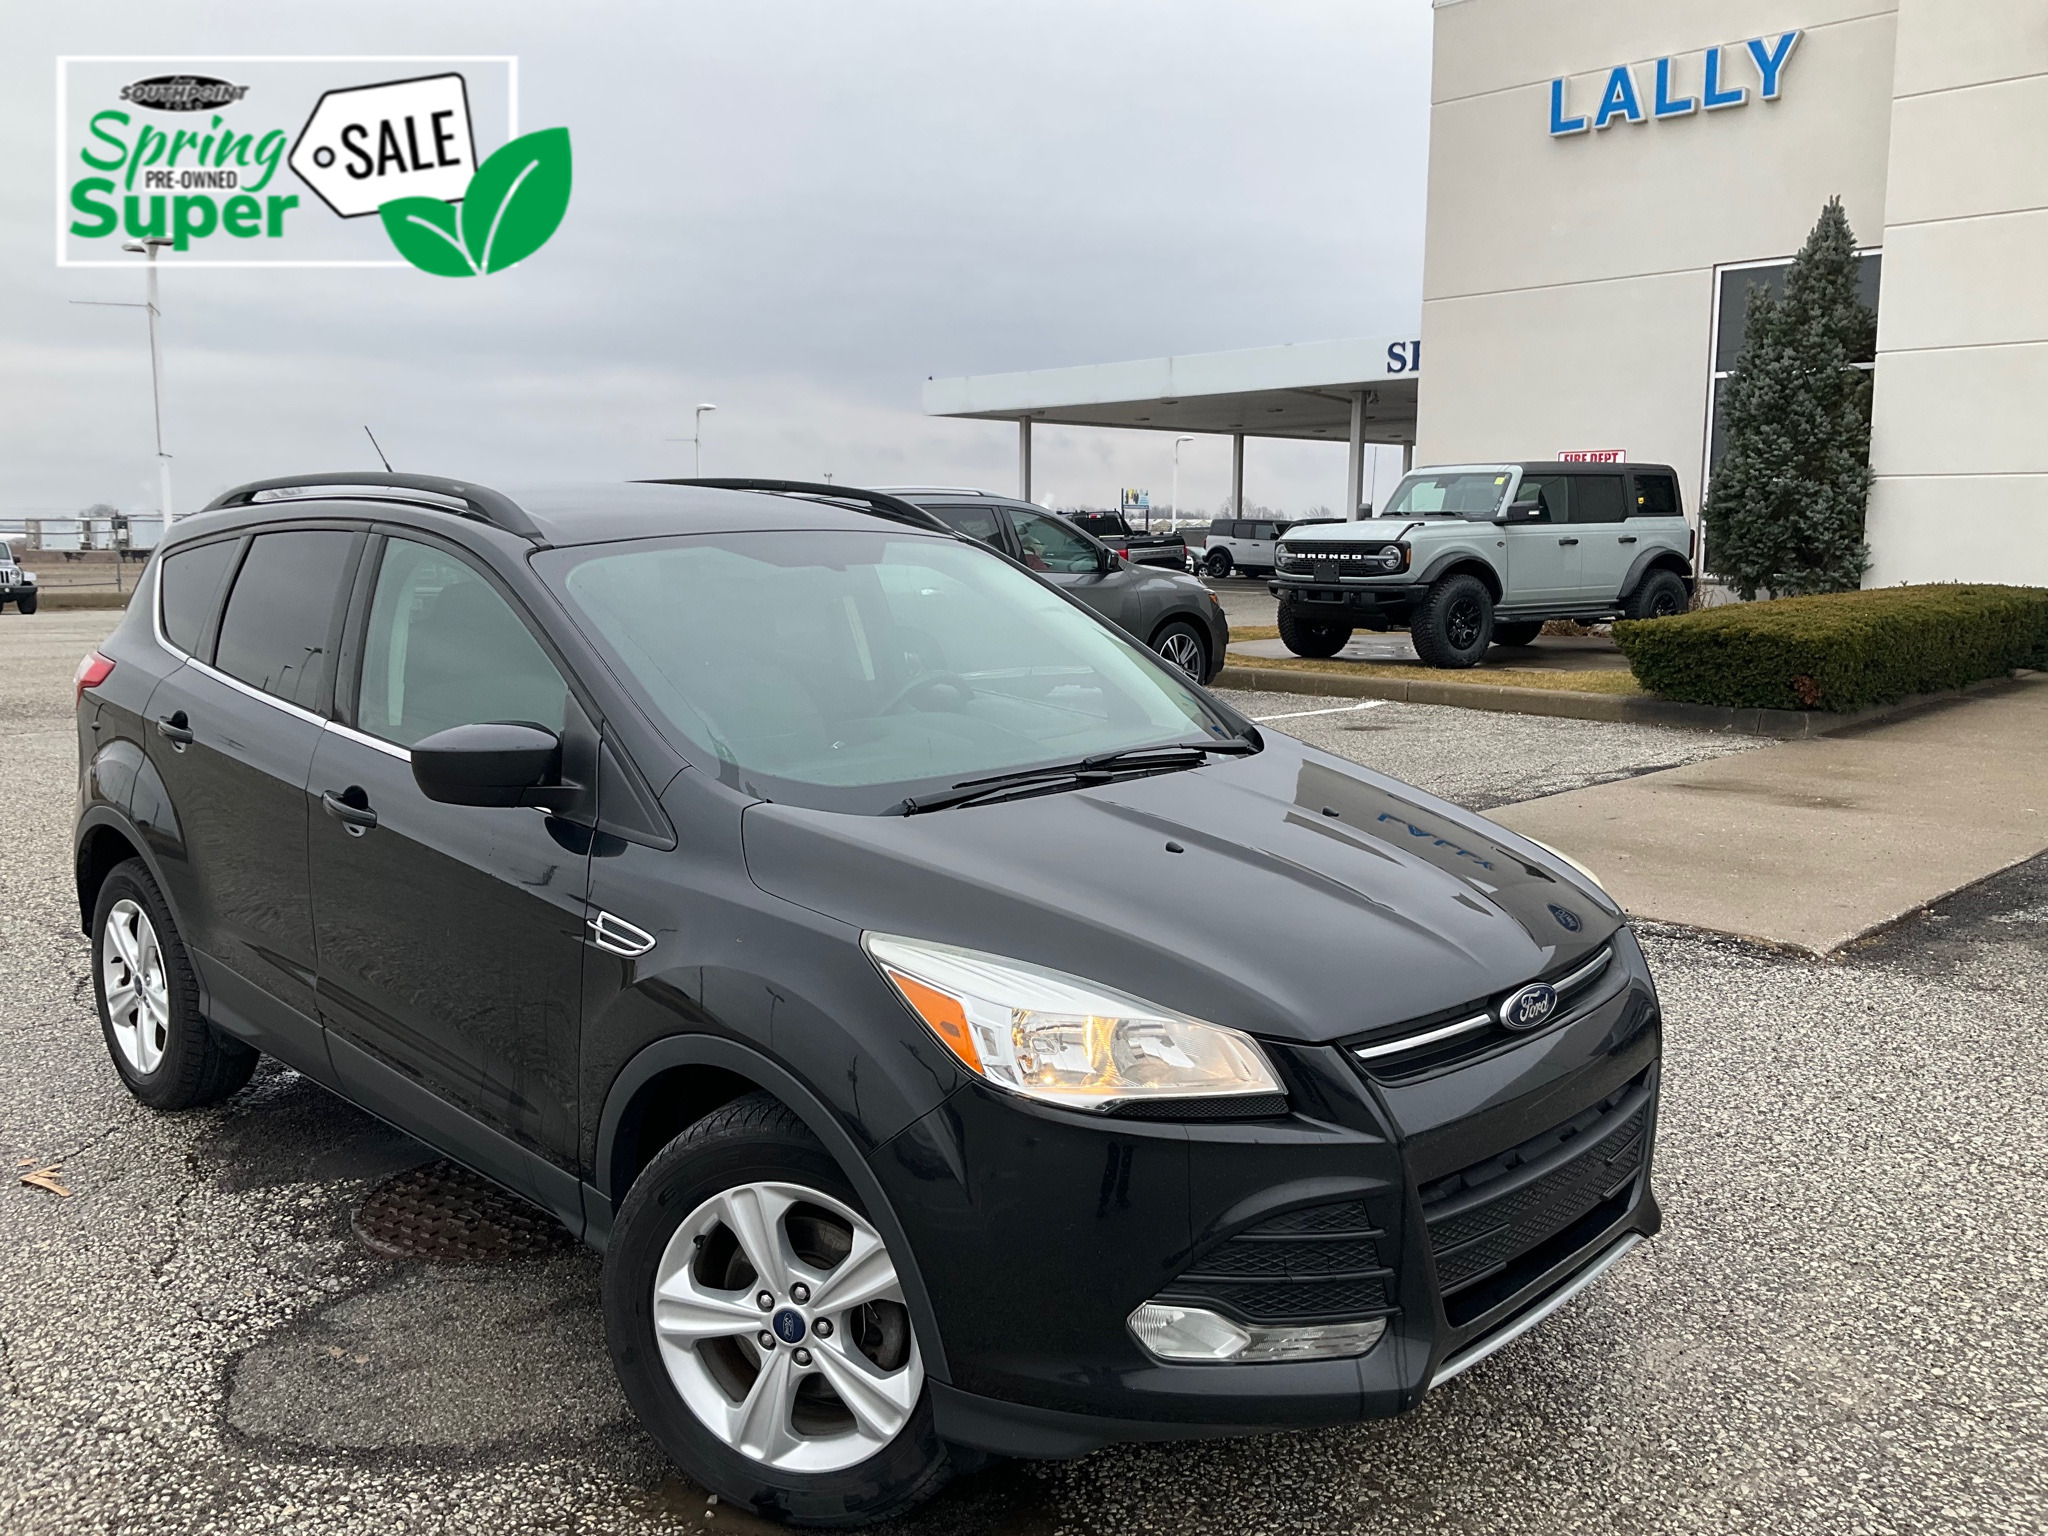 2014 Ford Escape ***** THIS UNIT IS SOLD AS IS *****